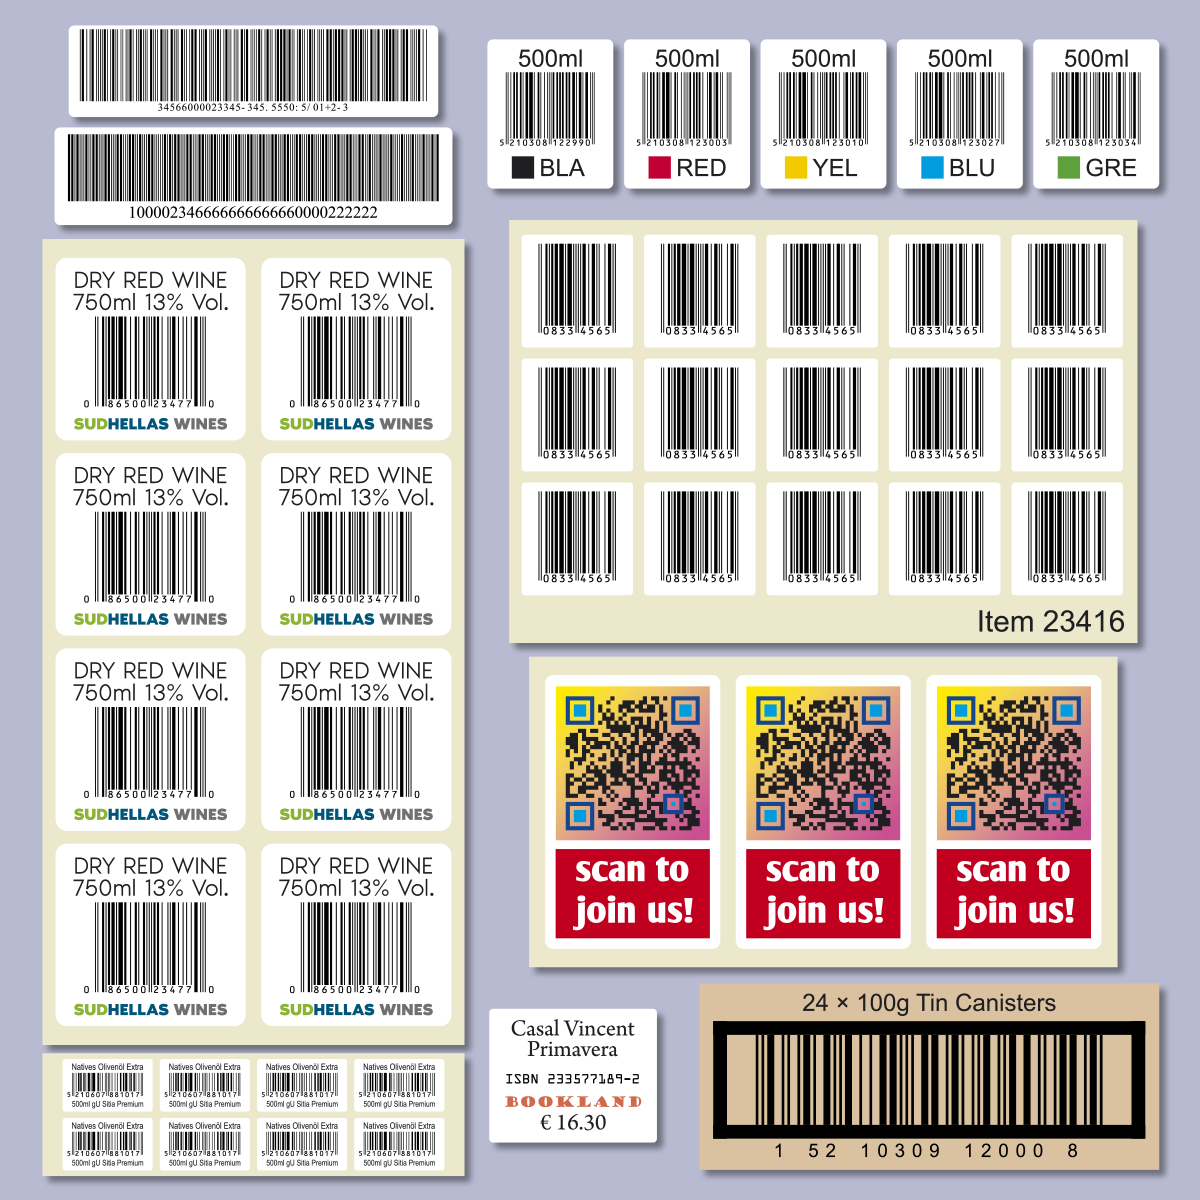 Barcode and QR code label production